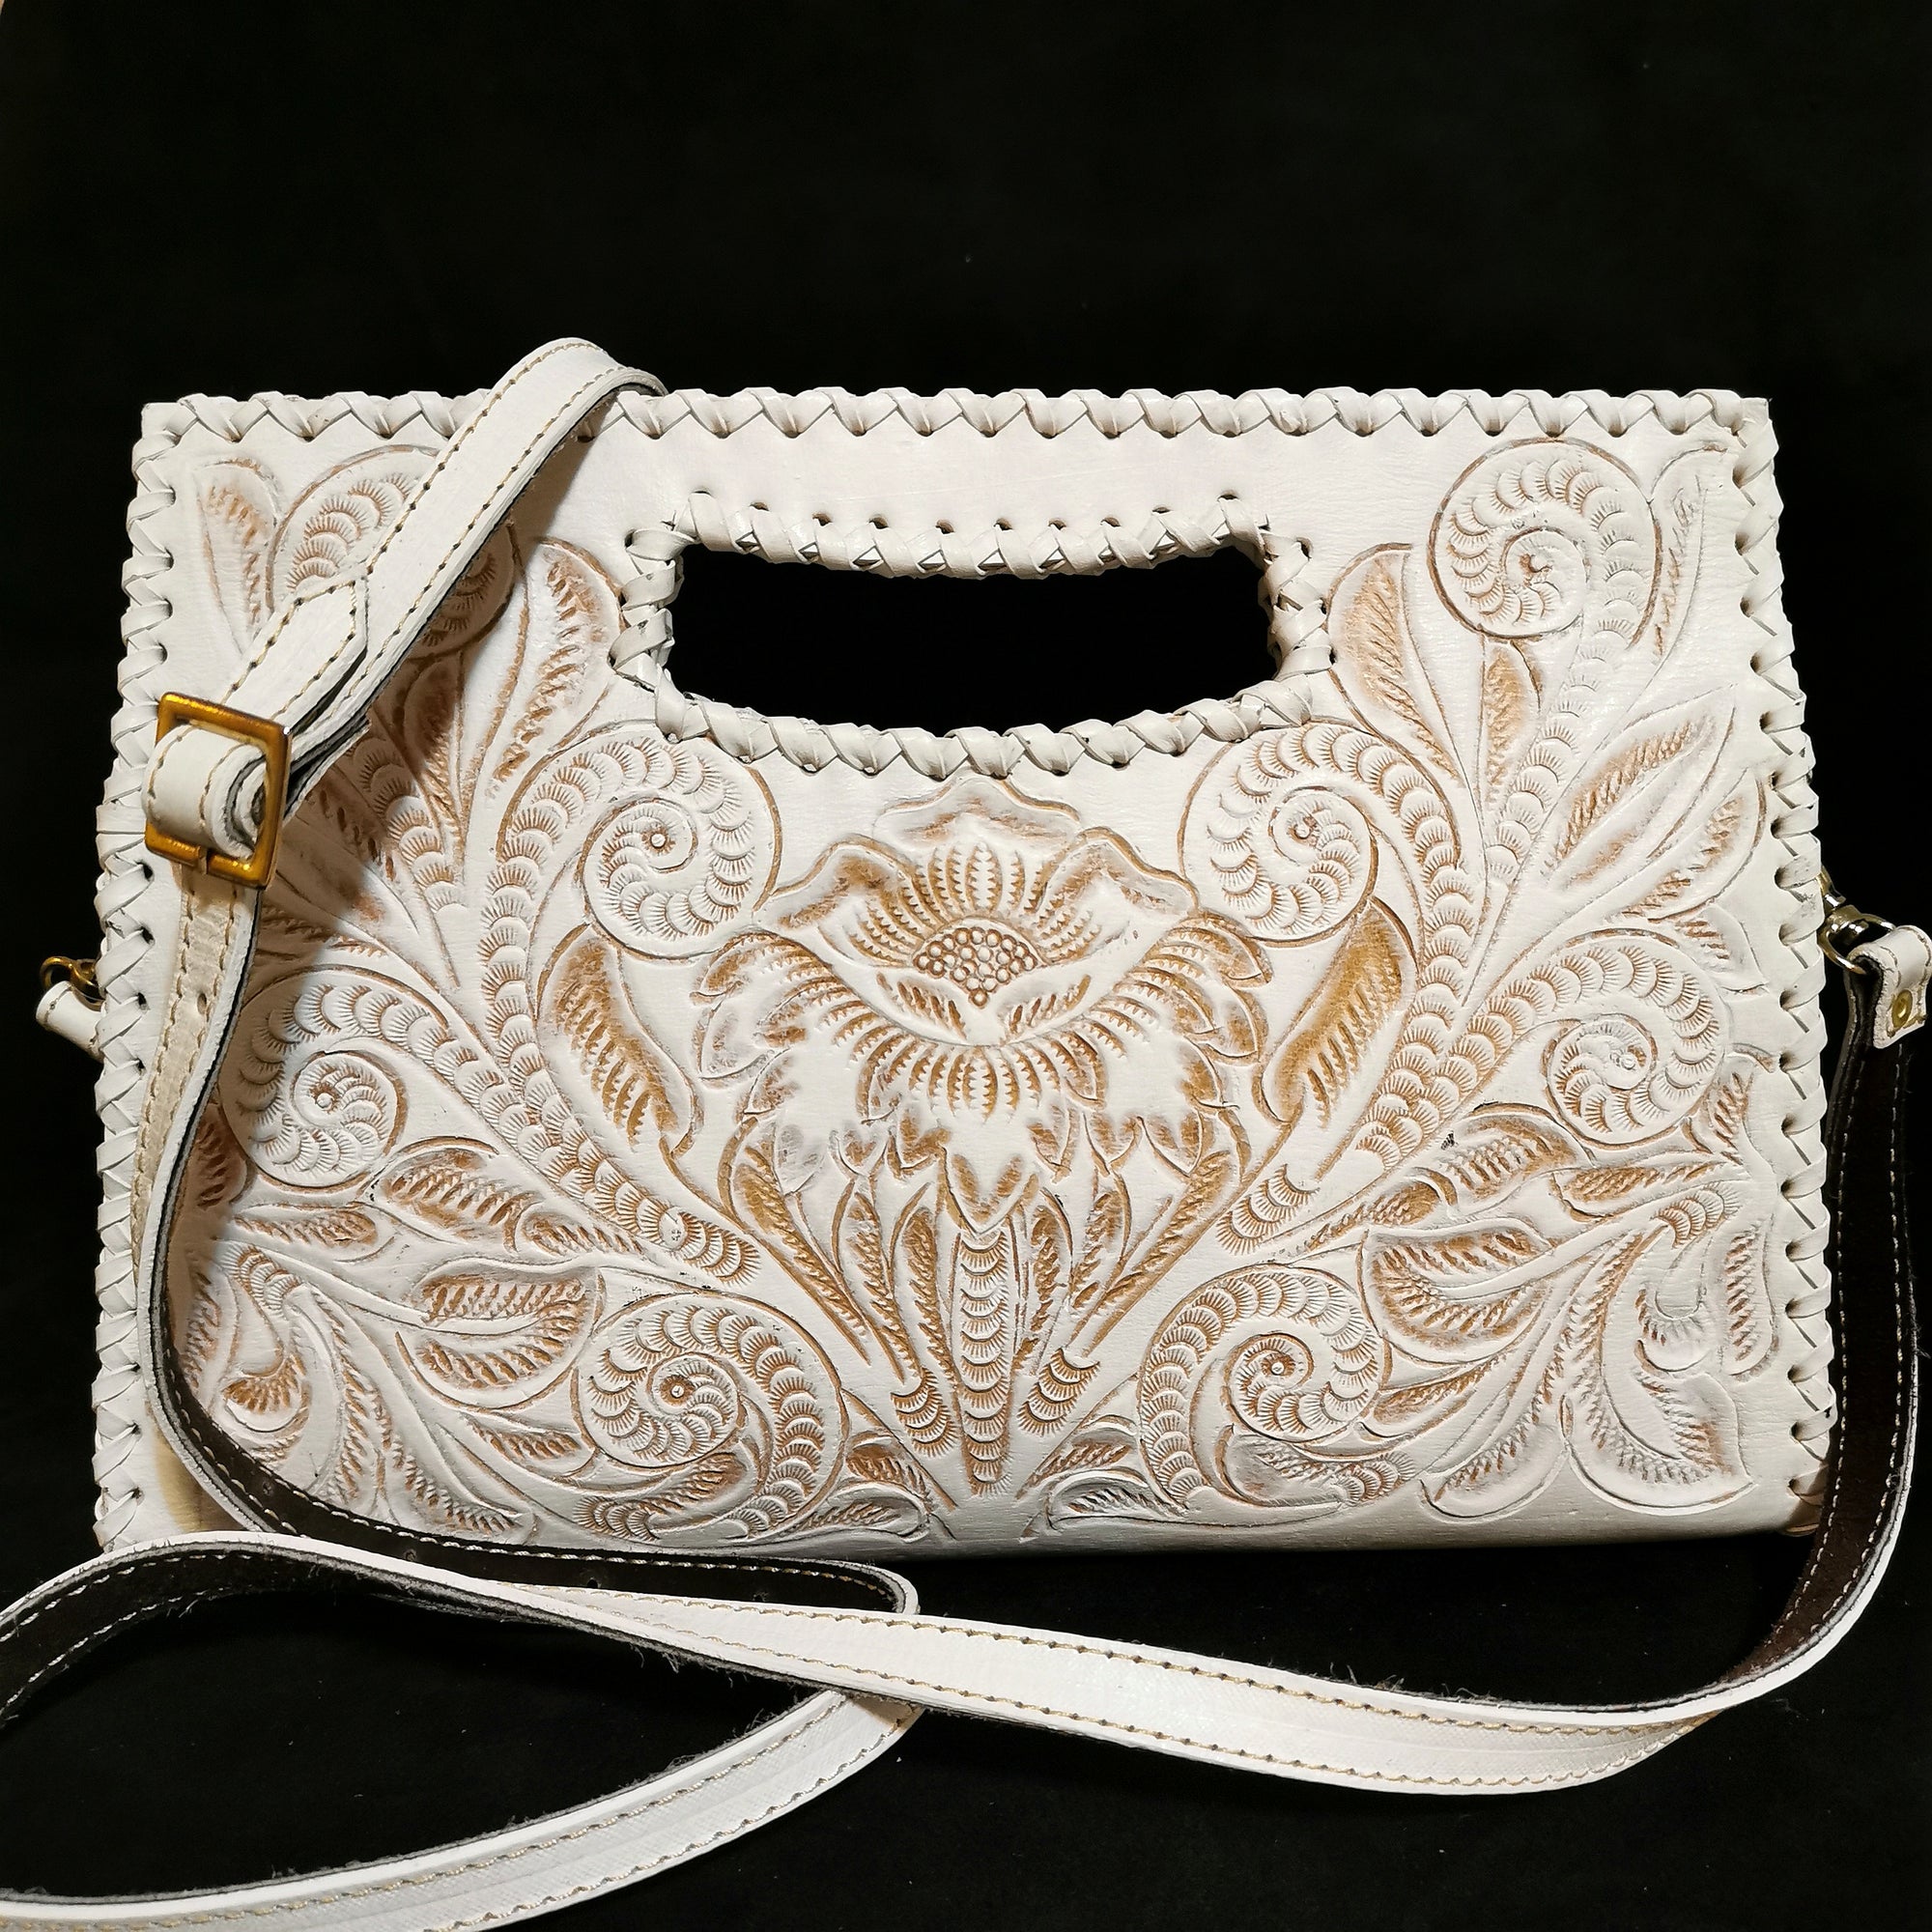 Hand tooled leather bag for women, leather handbag, women leather purse. white leather bag